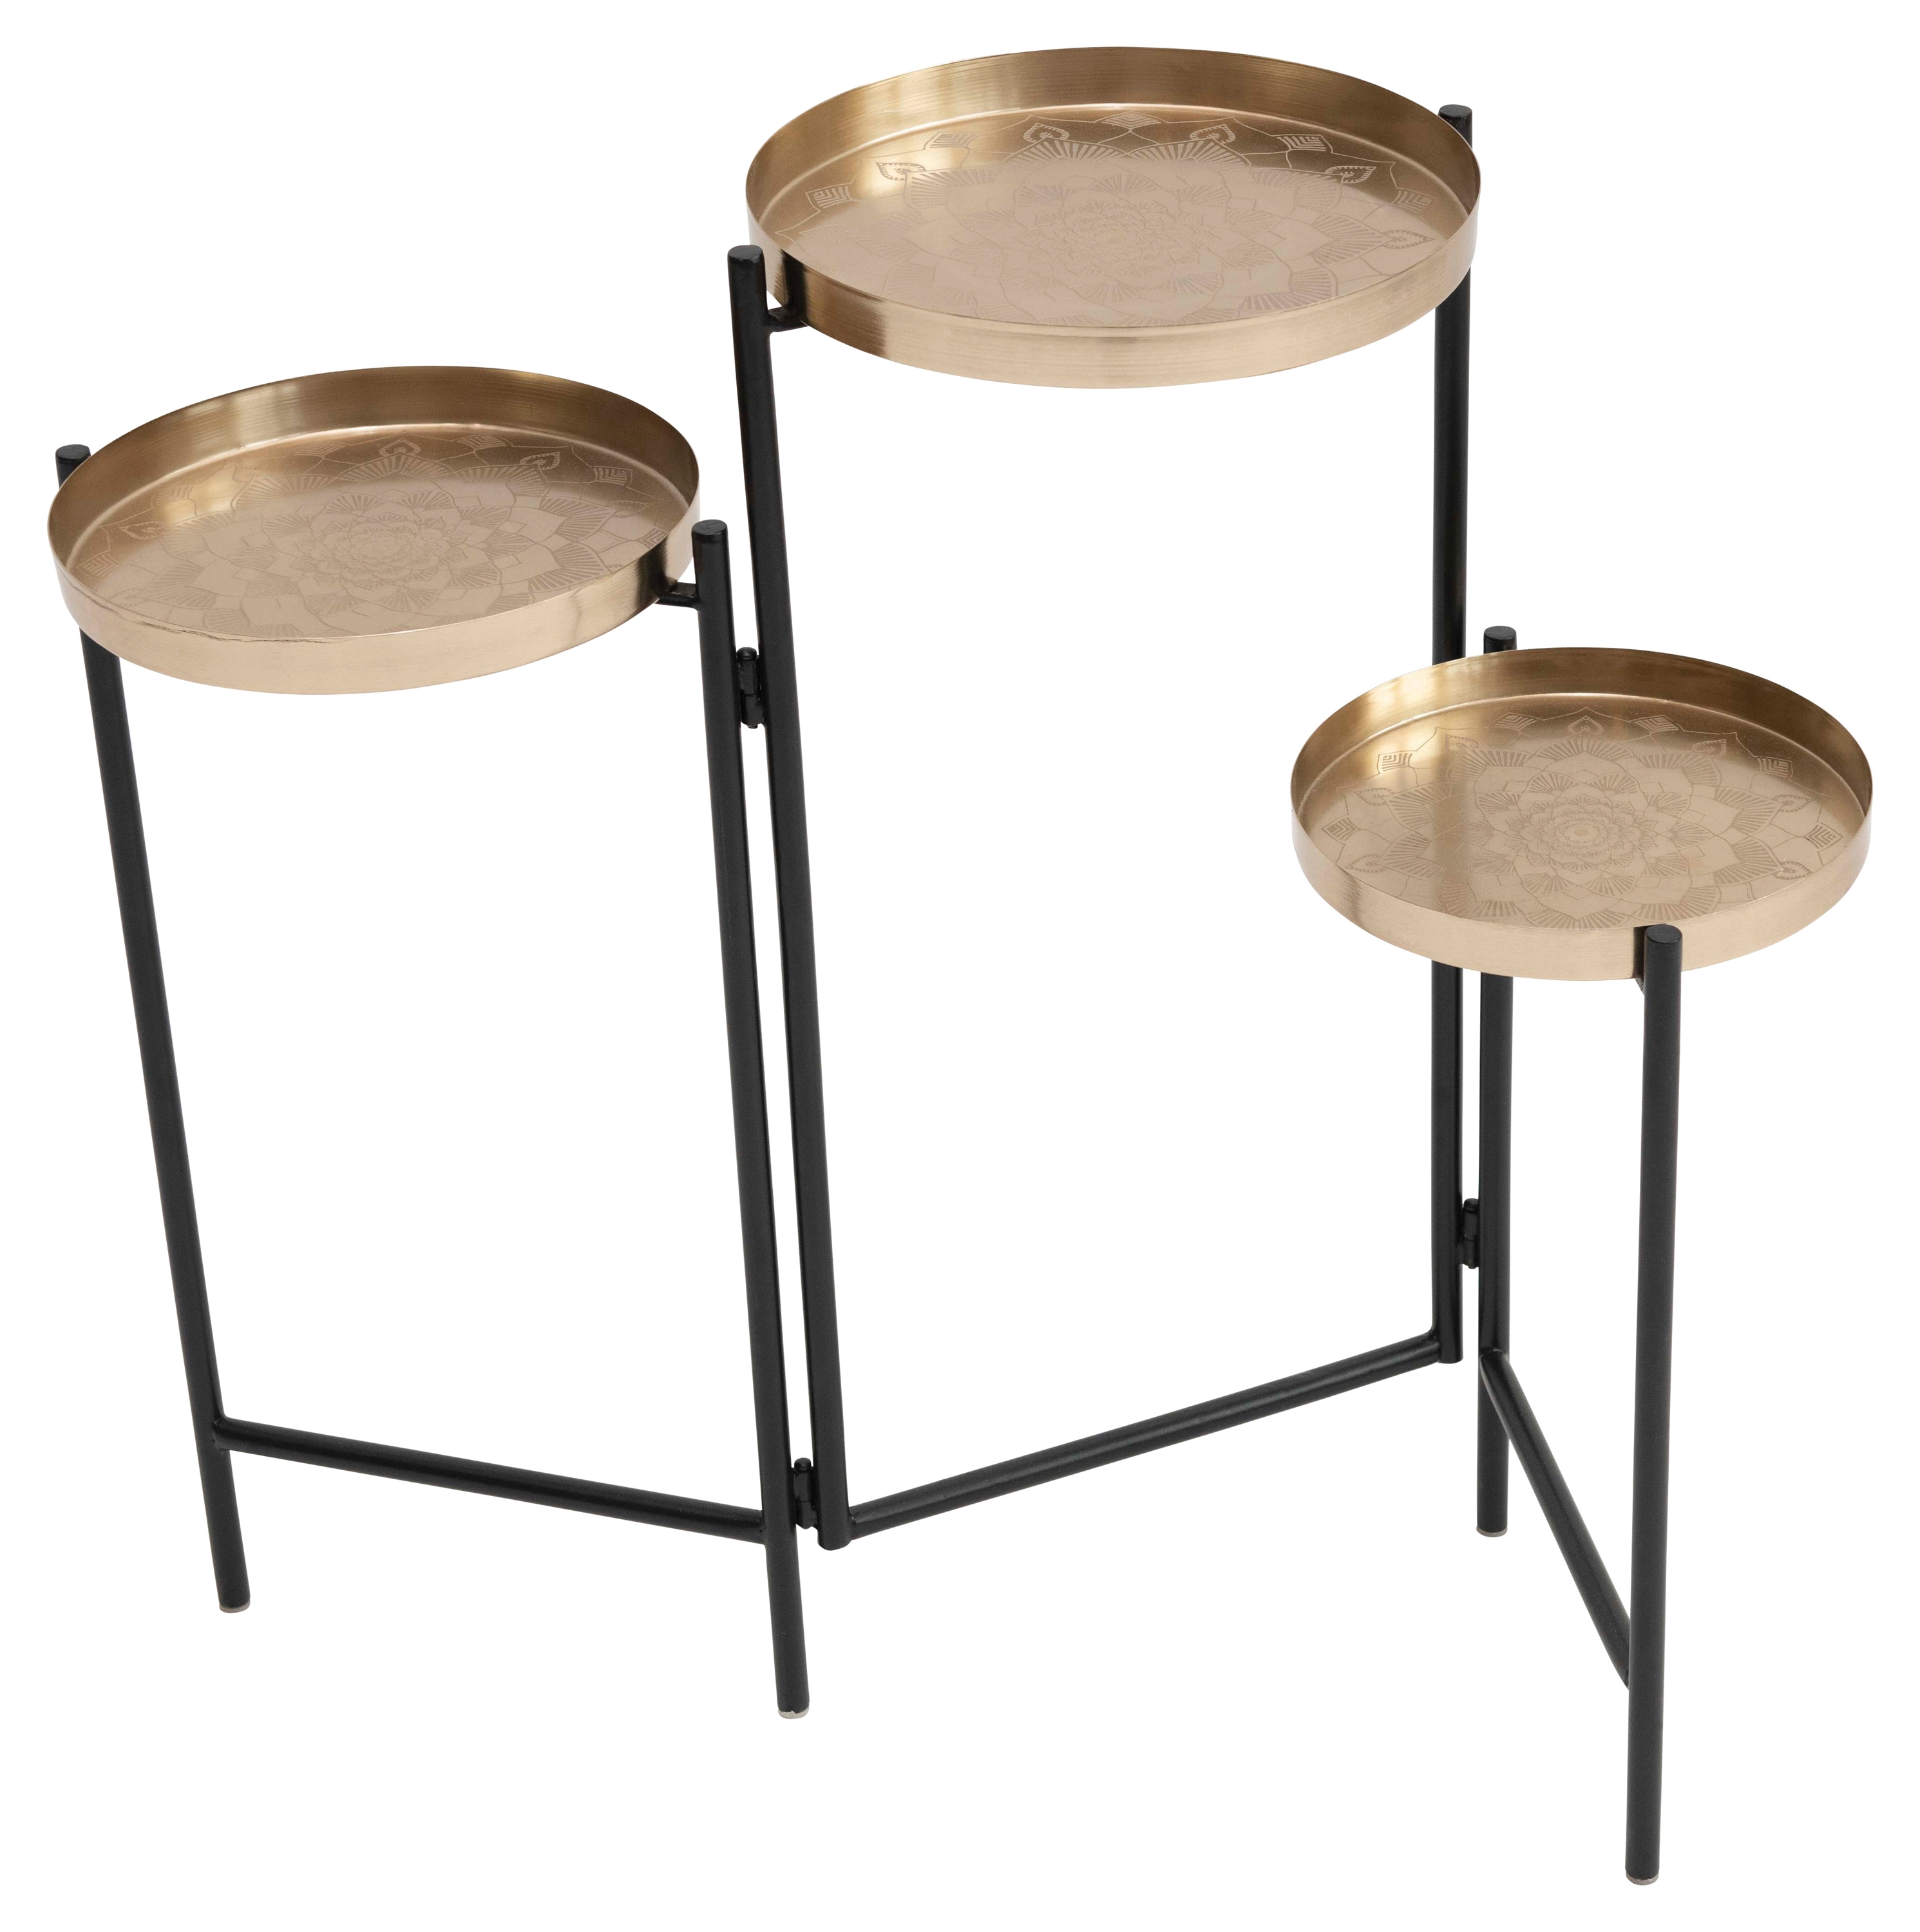 30"L Foldable 3-Tier Plant Stand with Tray-Style Tops - Image 0